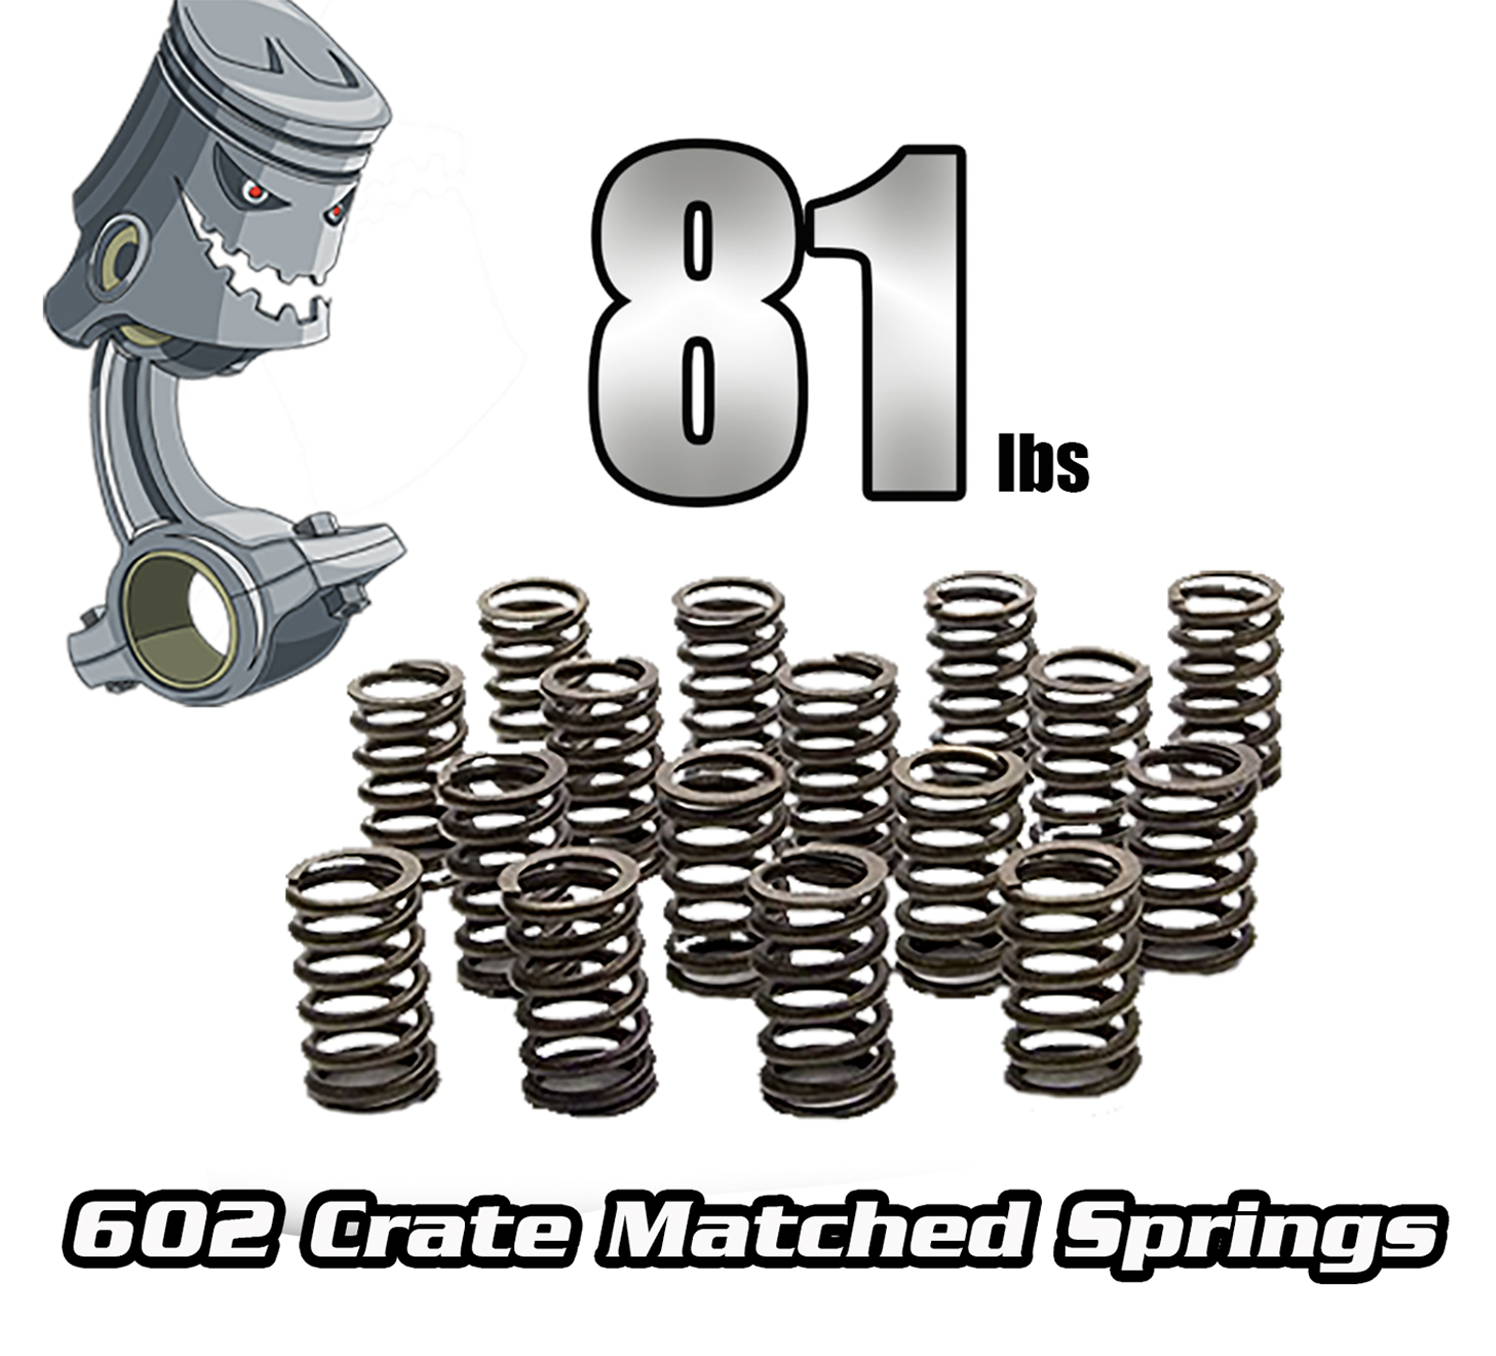 Premium 81lb Matched Valve Springs for 602 Crate